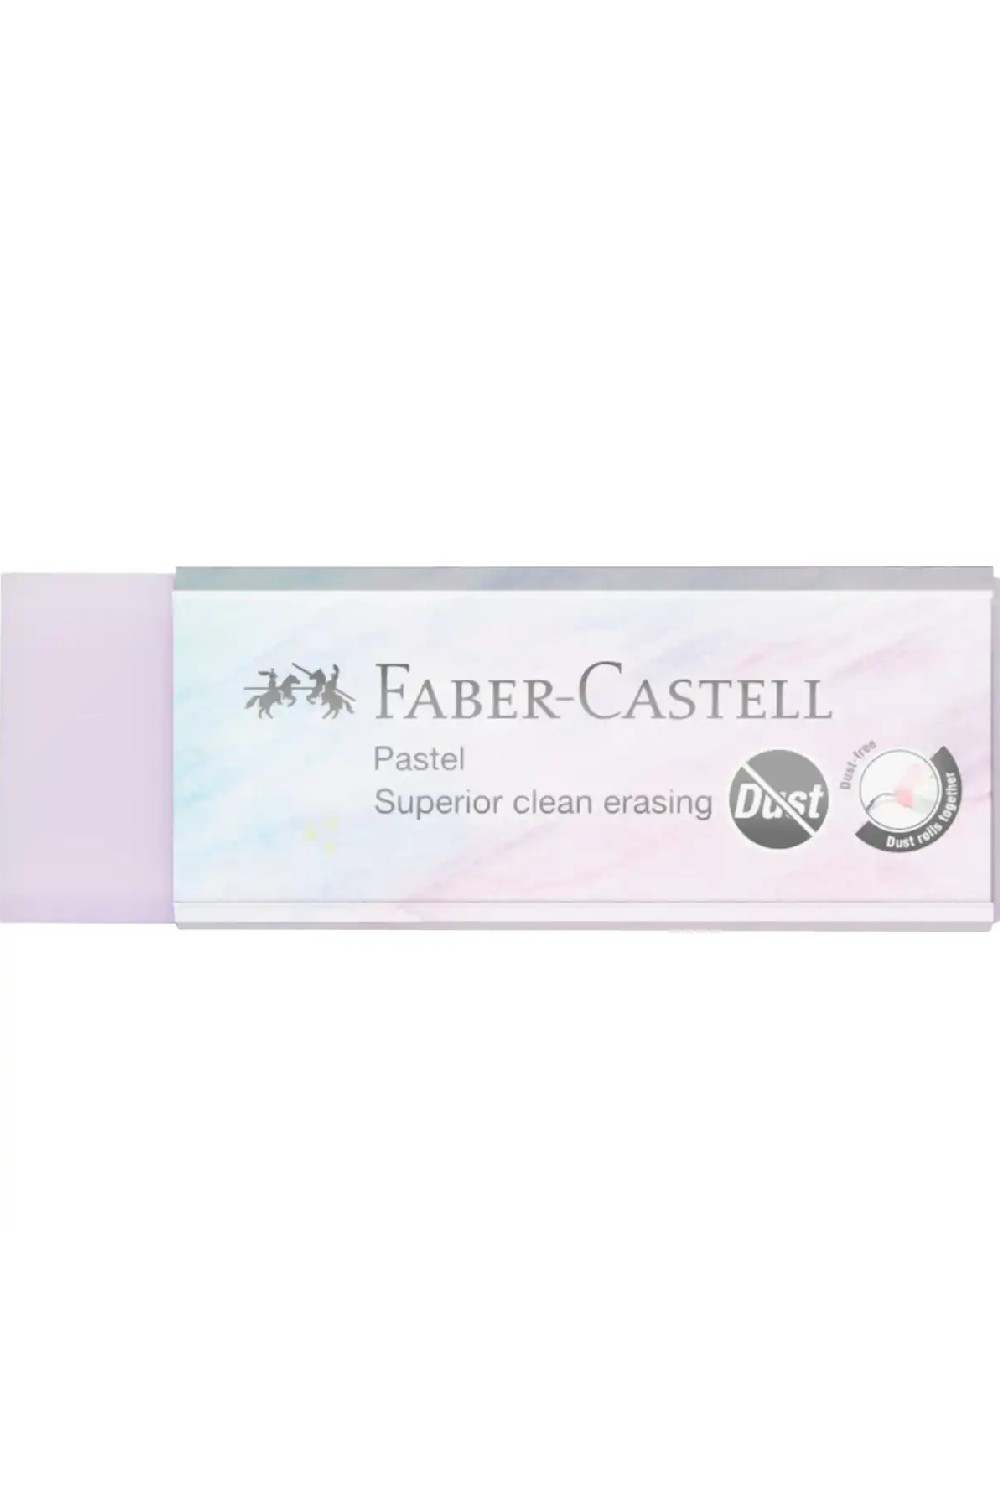 Faber Castell Γόμα - Dust Free, Παστέλ Λιλά 187392